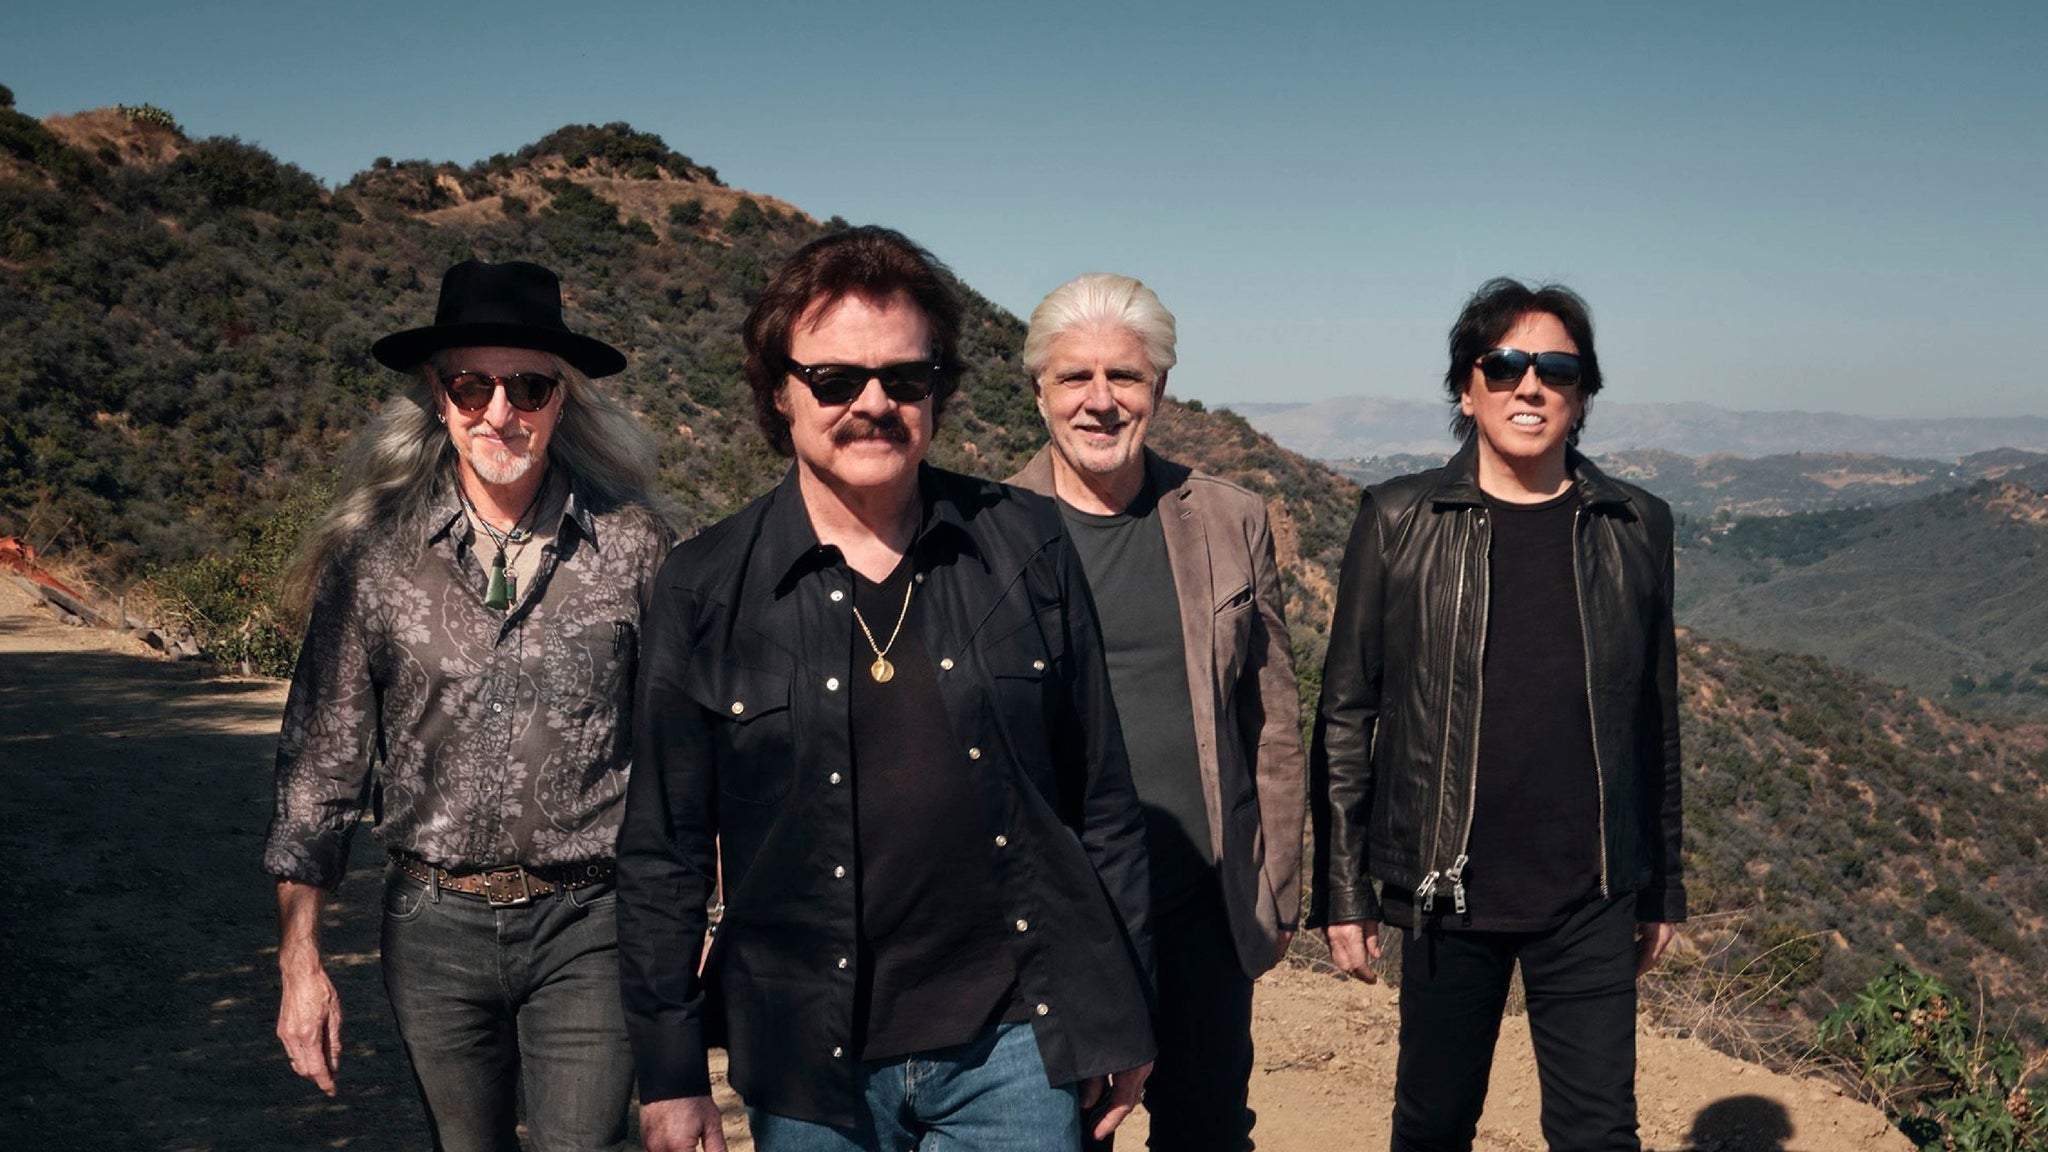 Image used with permission from Ticketmaster | The Doobie Brothers 50th Anniversary Tour tickets